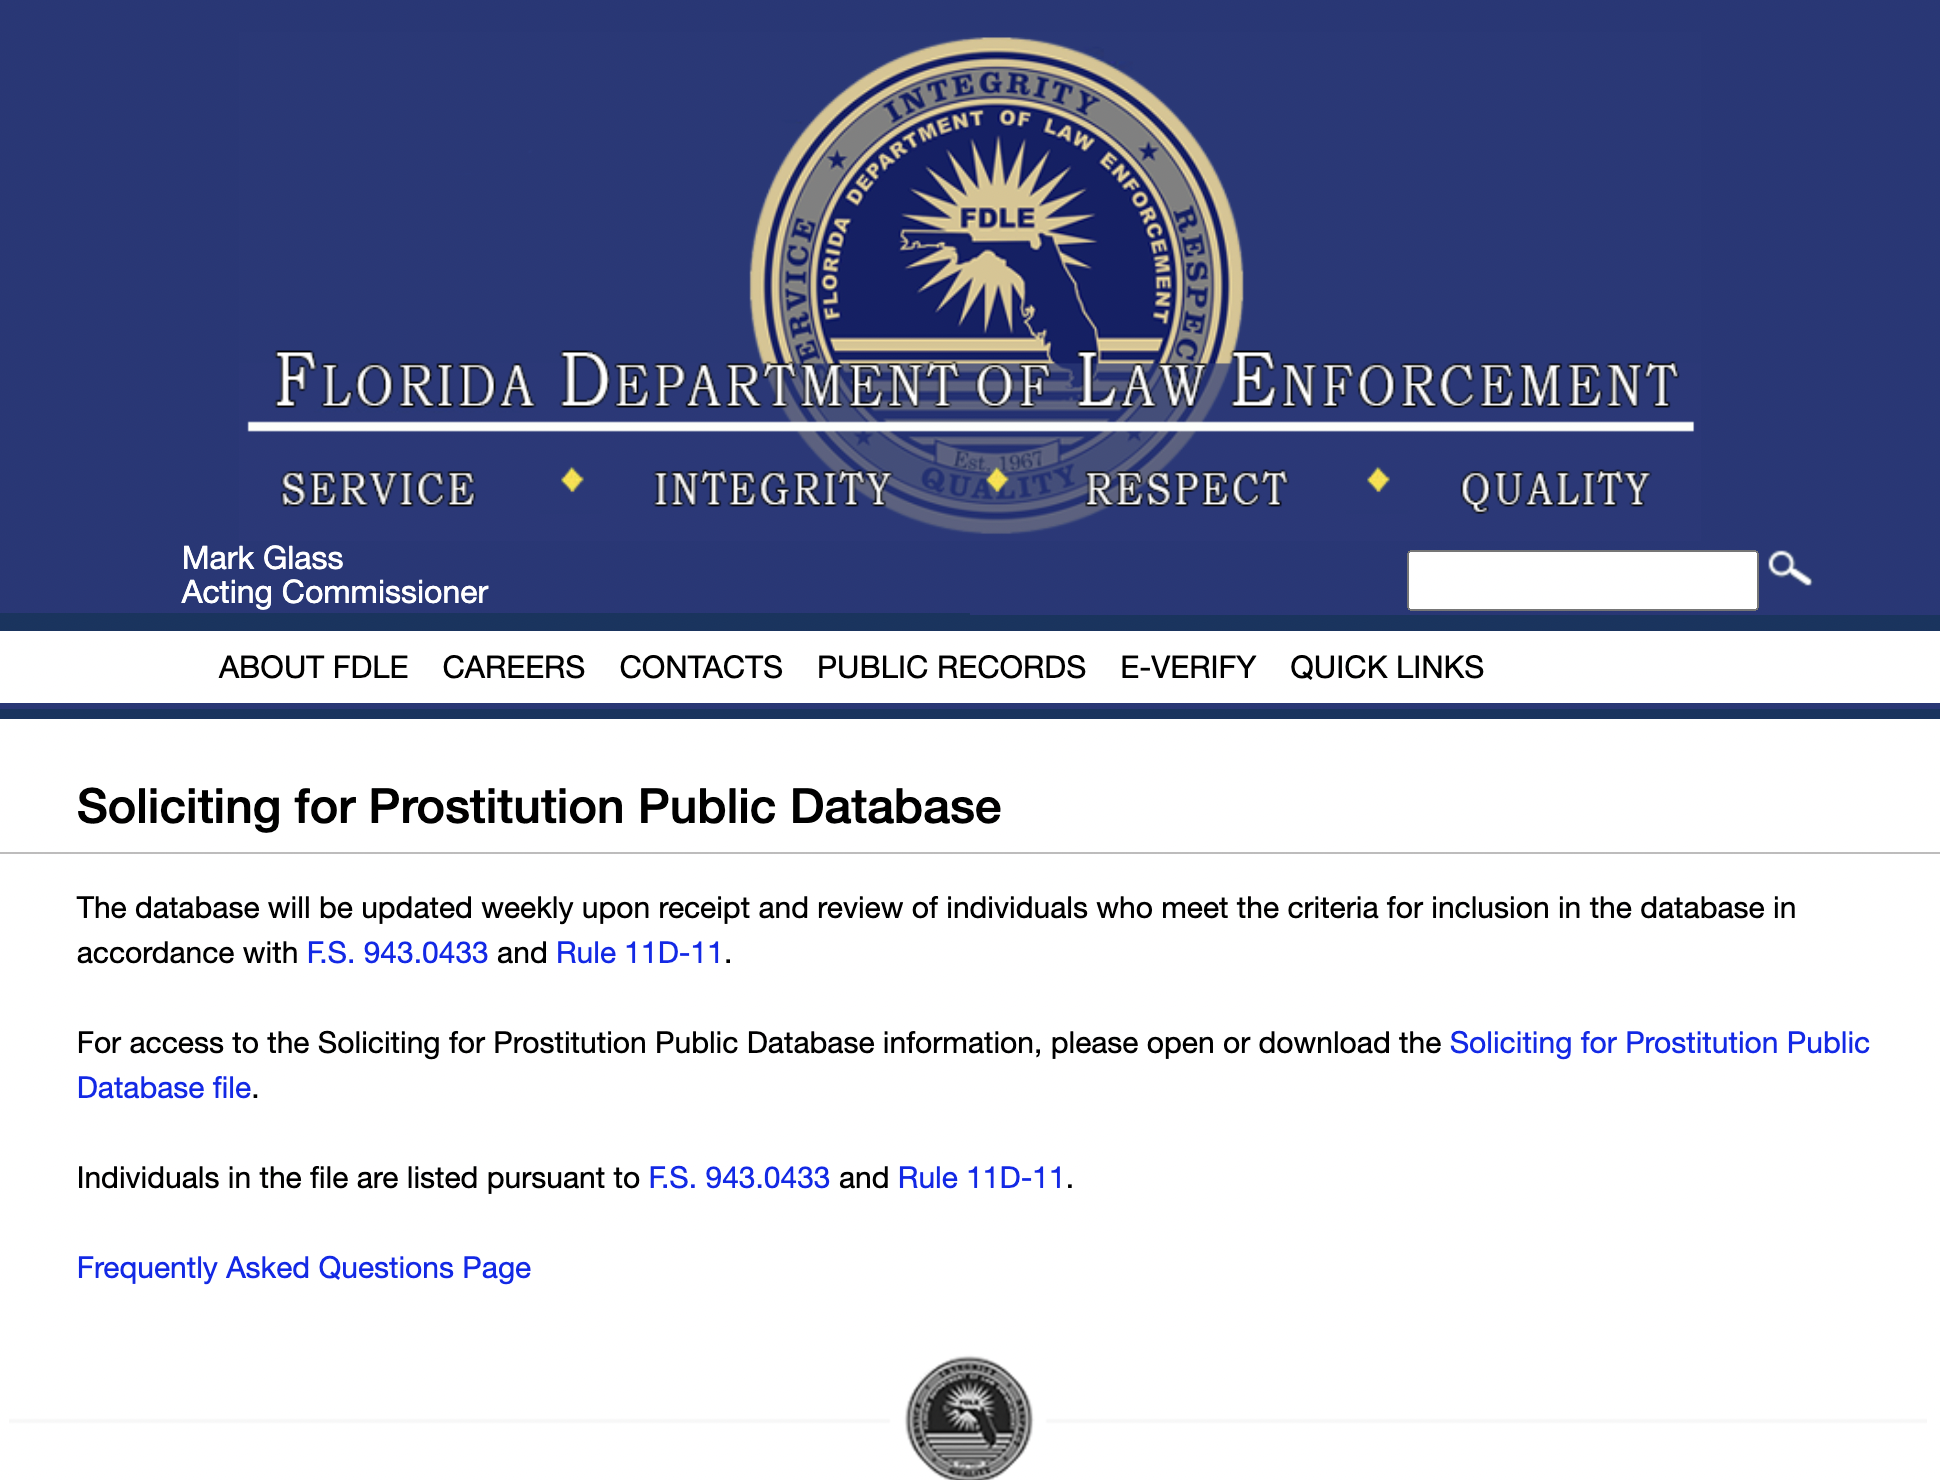 Problems with Floridas Database for Soliciting Prostitution pic